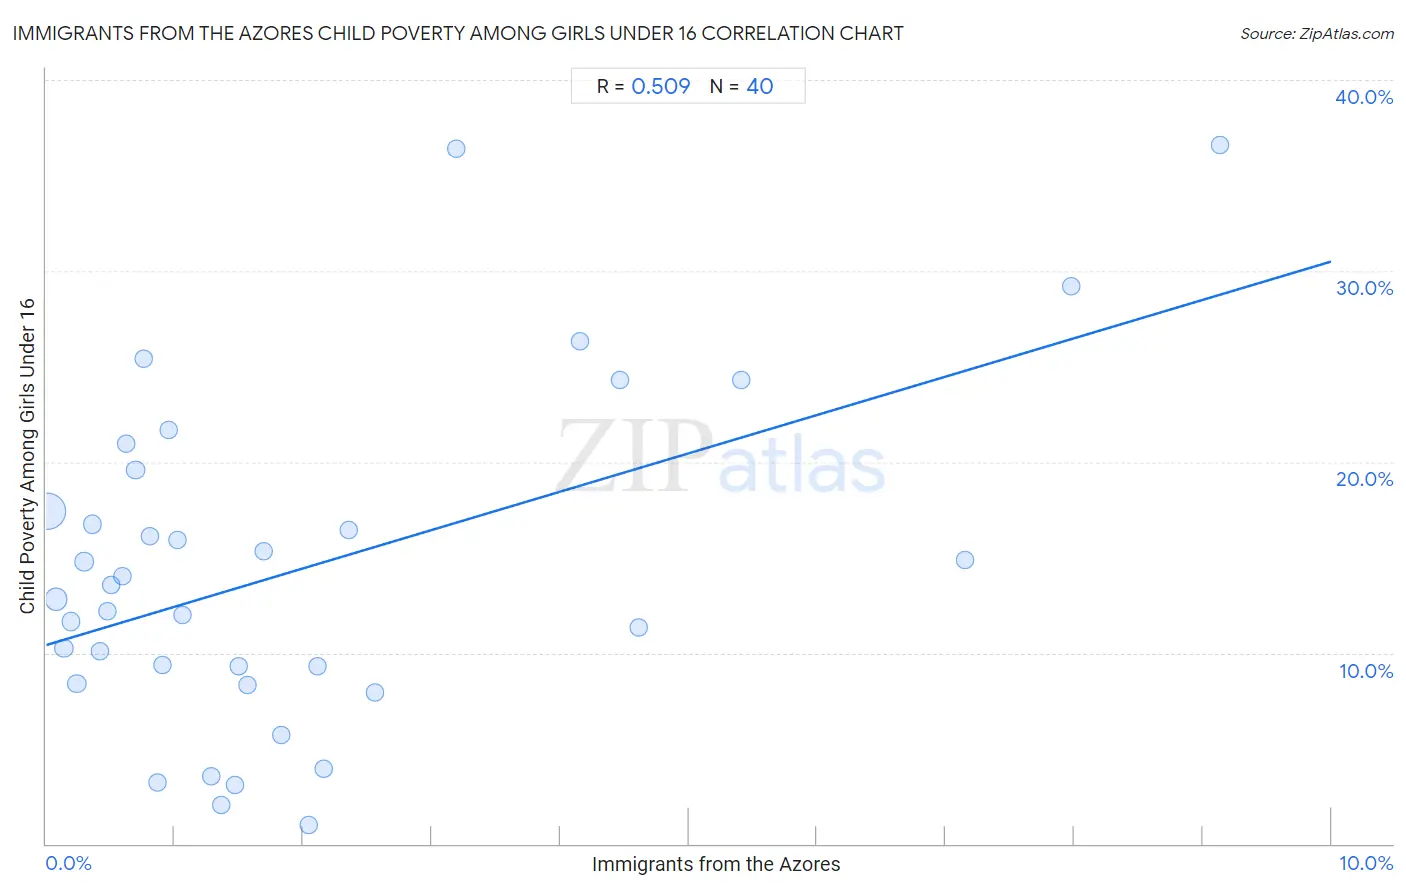 Immigrants from the Azores Child Poverty Among Girls Under 16